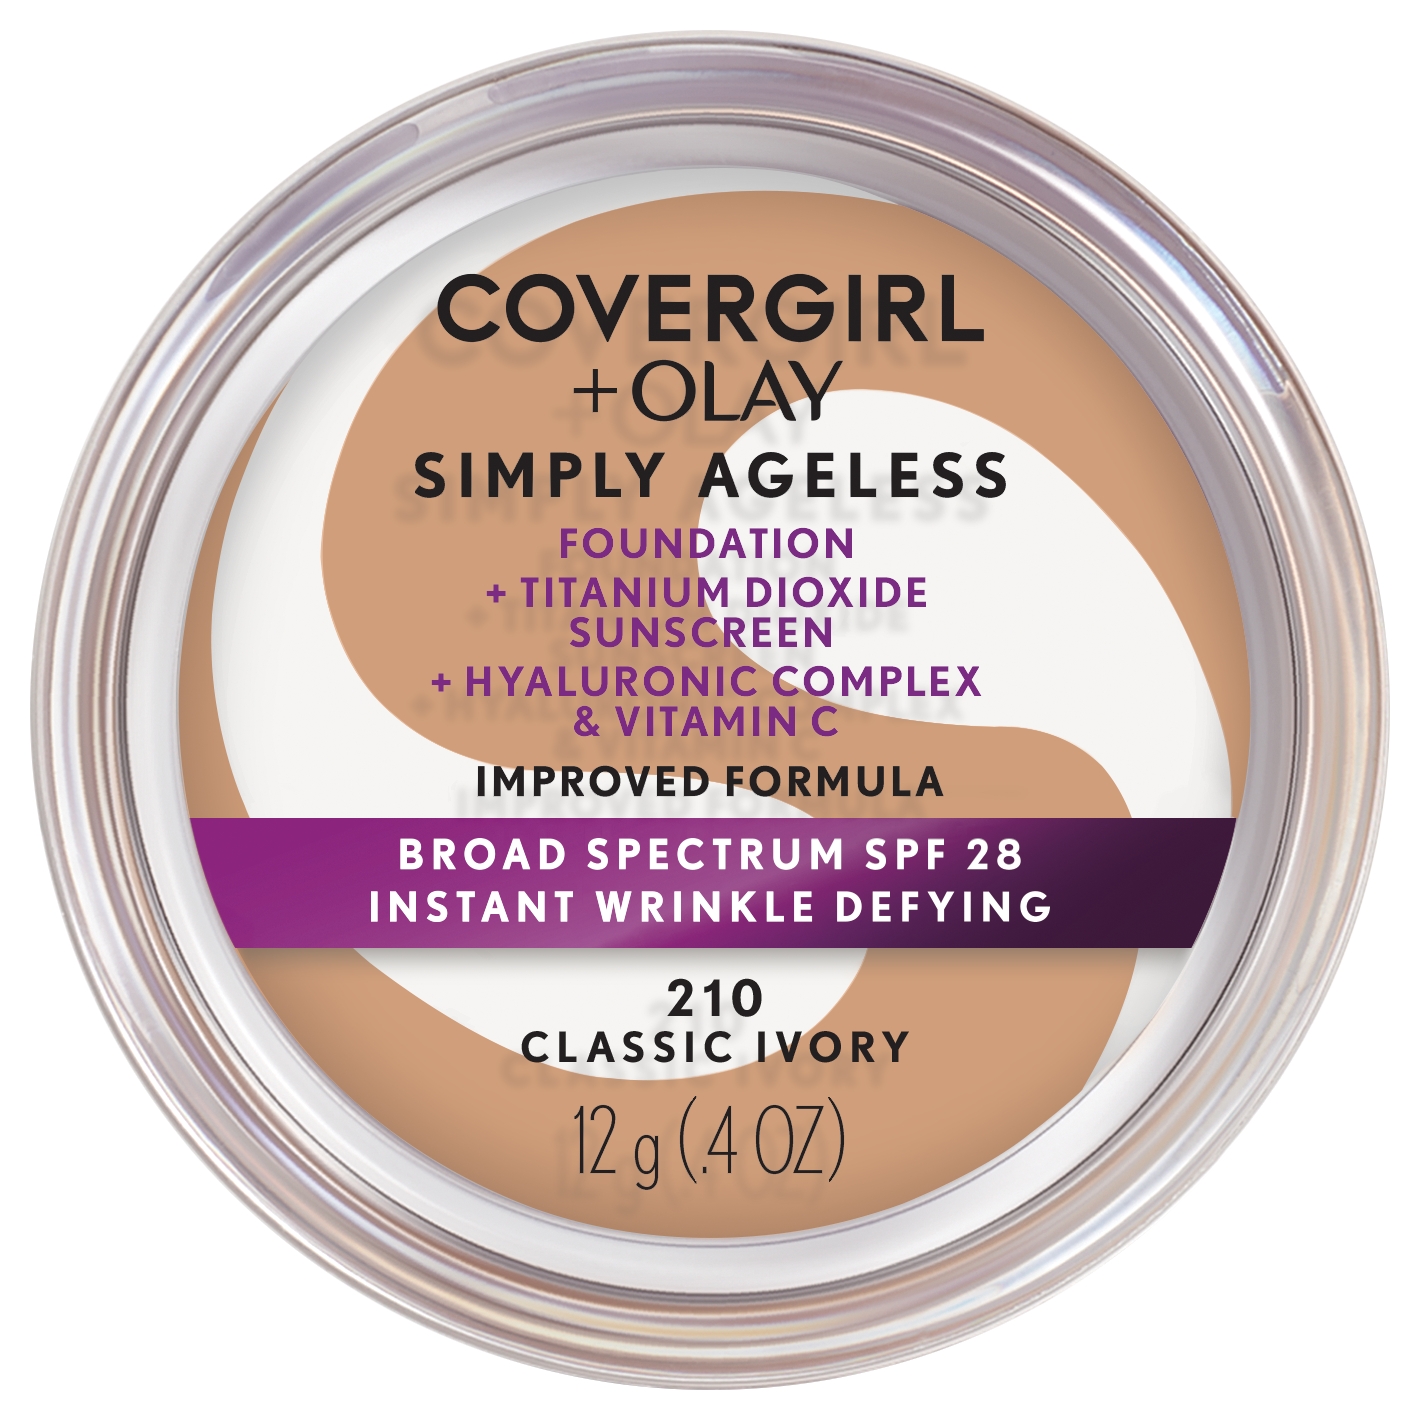 COVERGIRL + OLAY Simply Ageless Instant Wrinkle-Defying Foundation with SPF 28, Classic Ivory, 0.44 oz - image 1 of 9